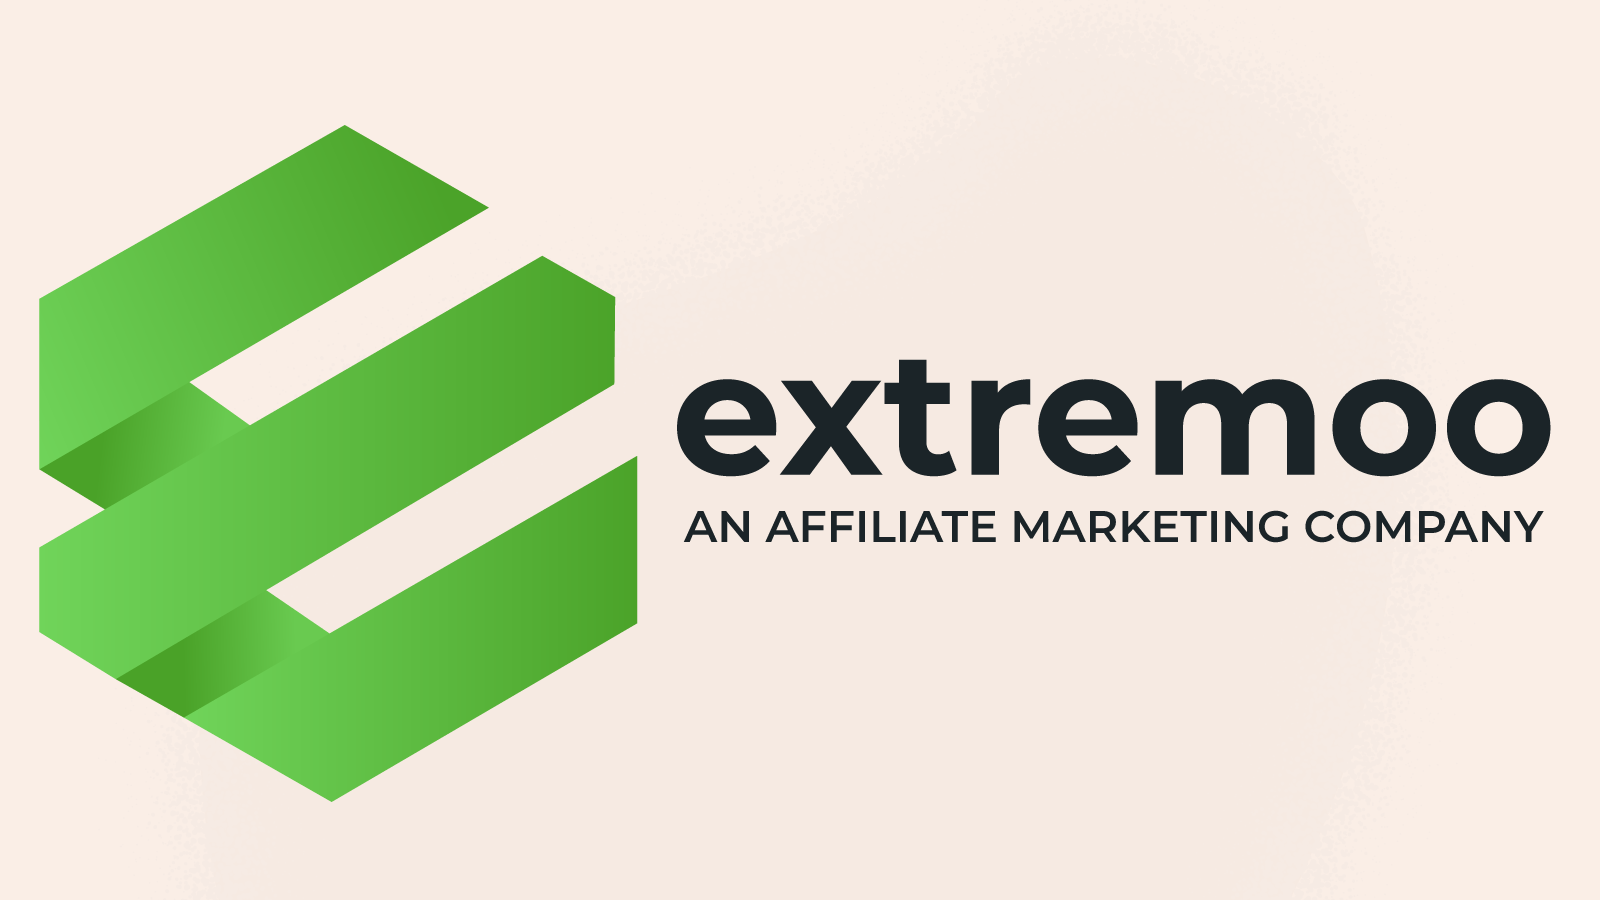 More on Extremoo Marketing Group, the Owner Company